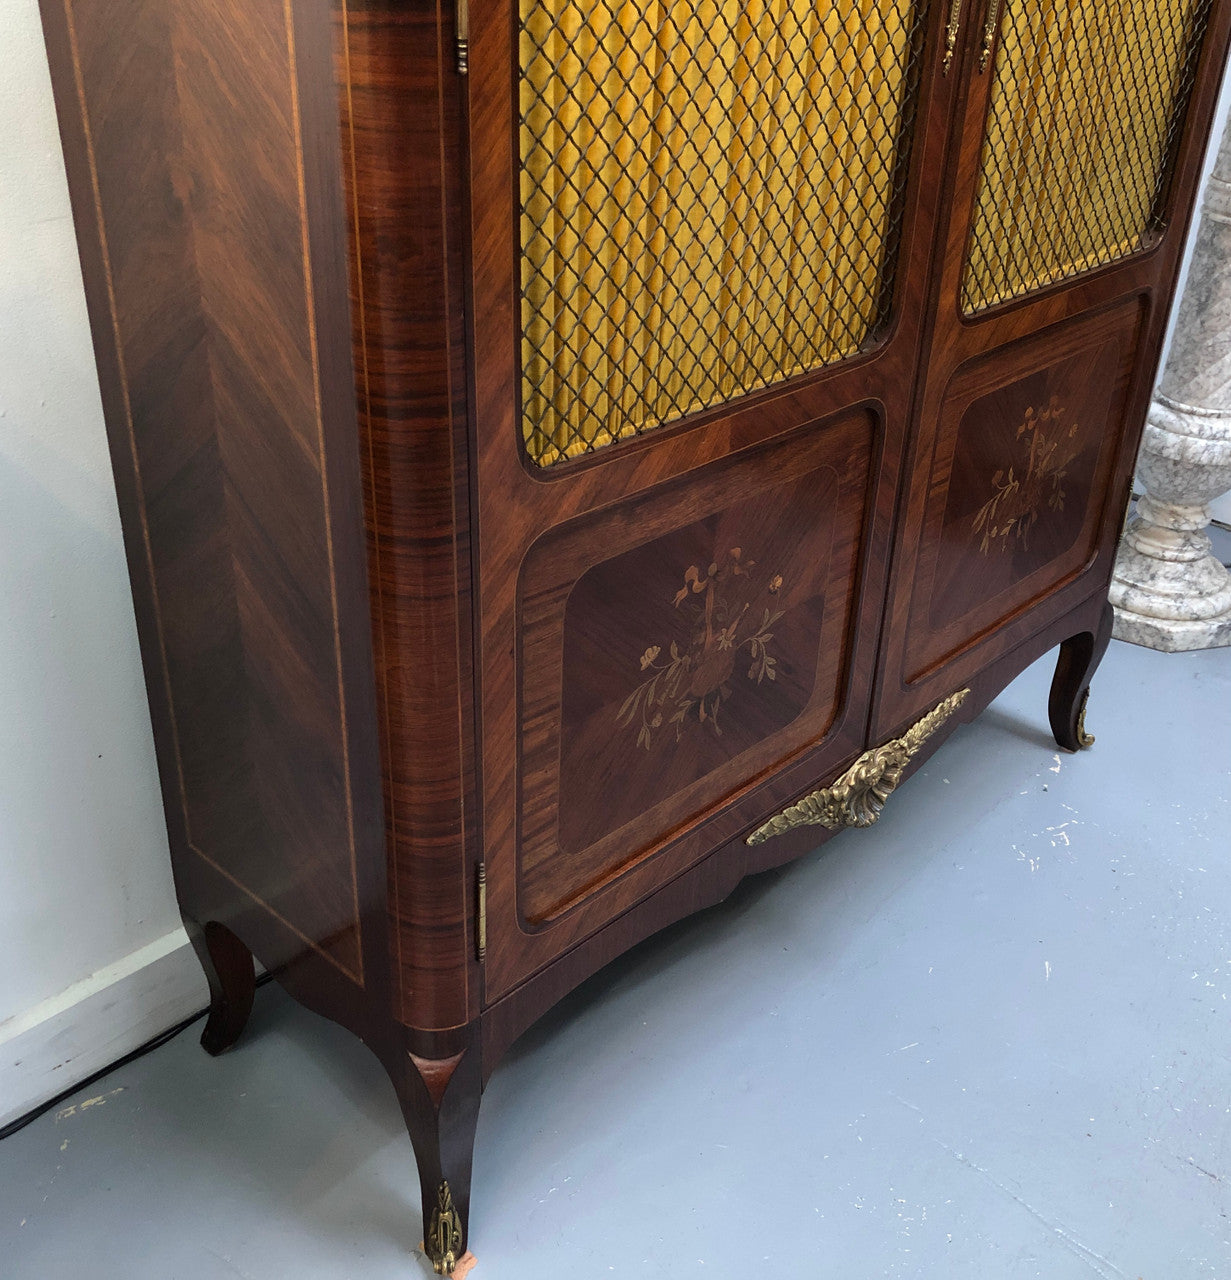 Beautiful 19th Century French Louis XV style Mahogany Blind Bookcase. This piece has lovely inlaid doors and ormolu mounts, marble top and four adjustable shelves. In good original detailed condition.